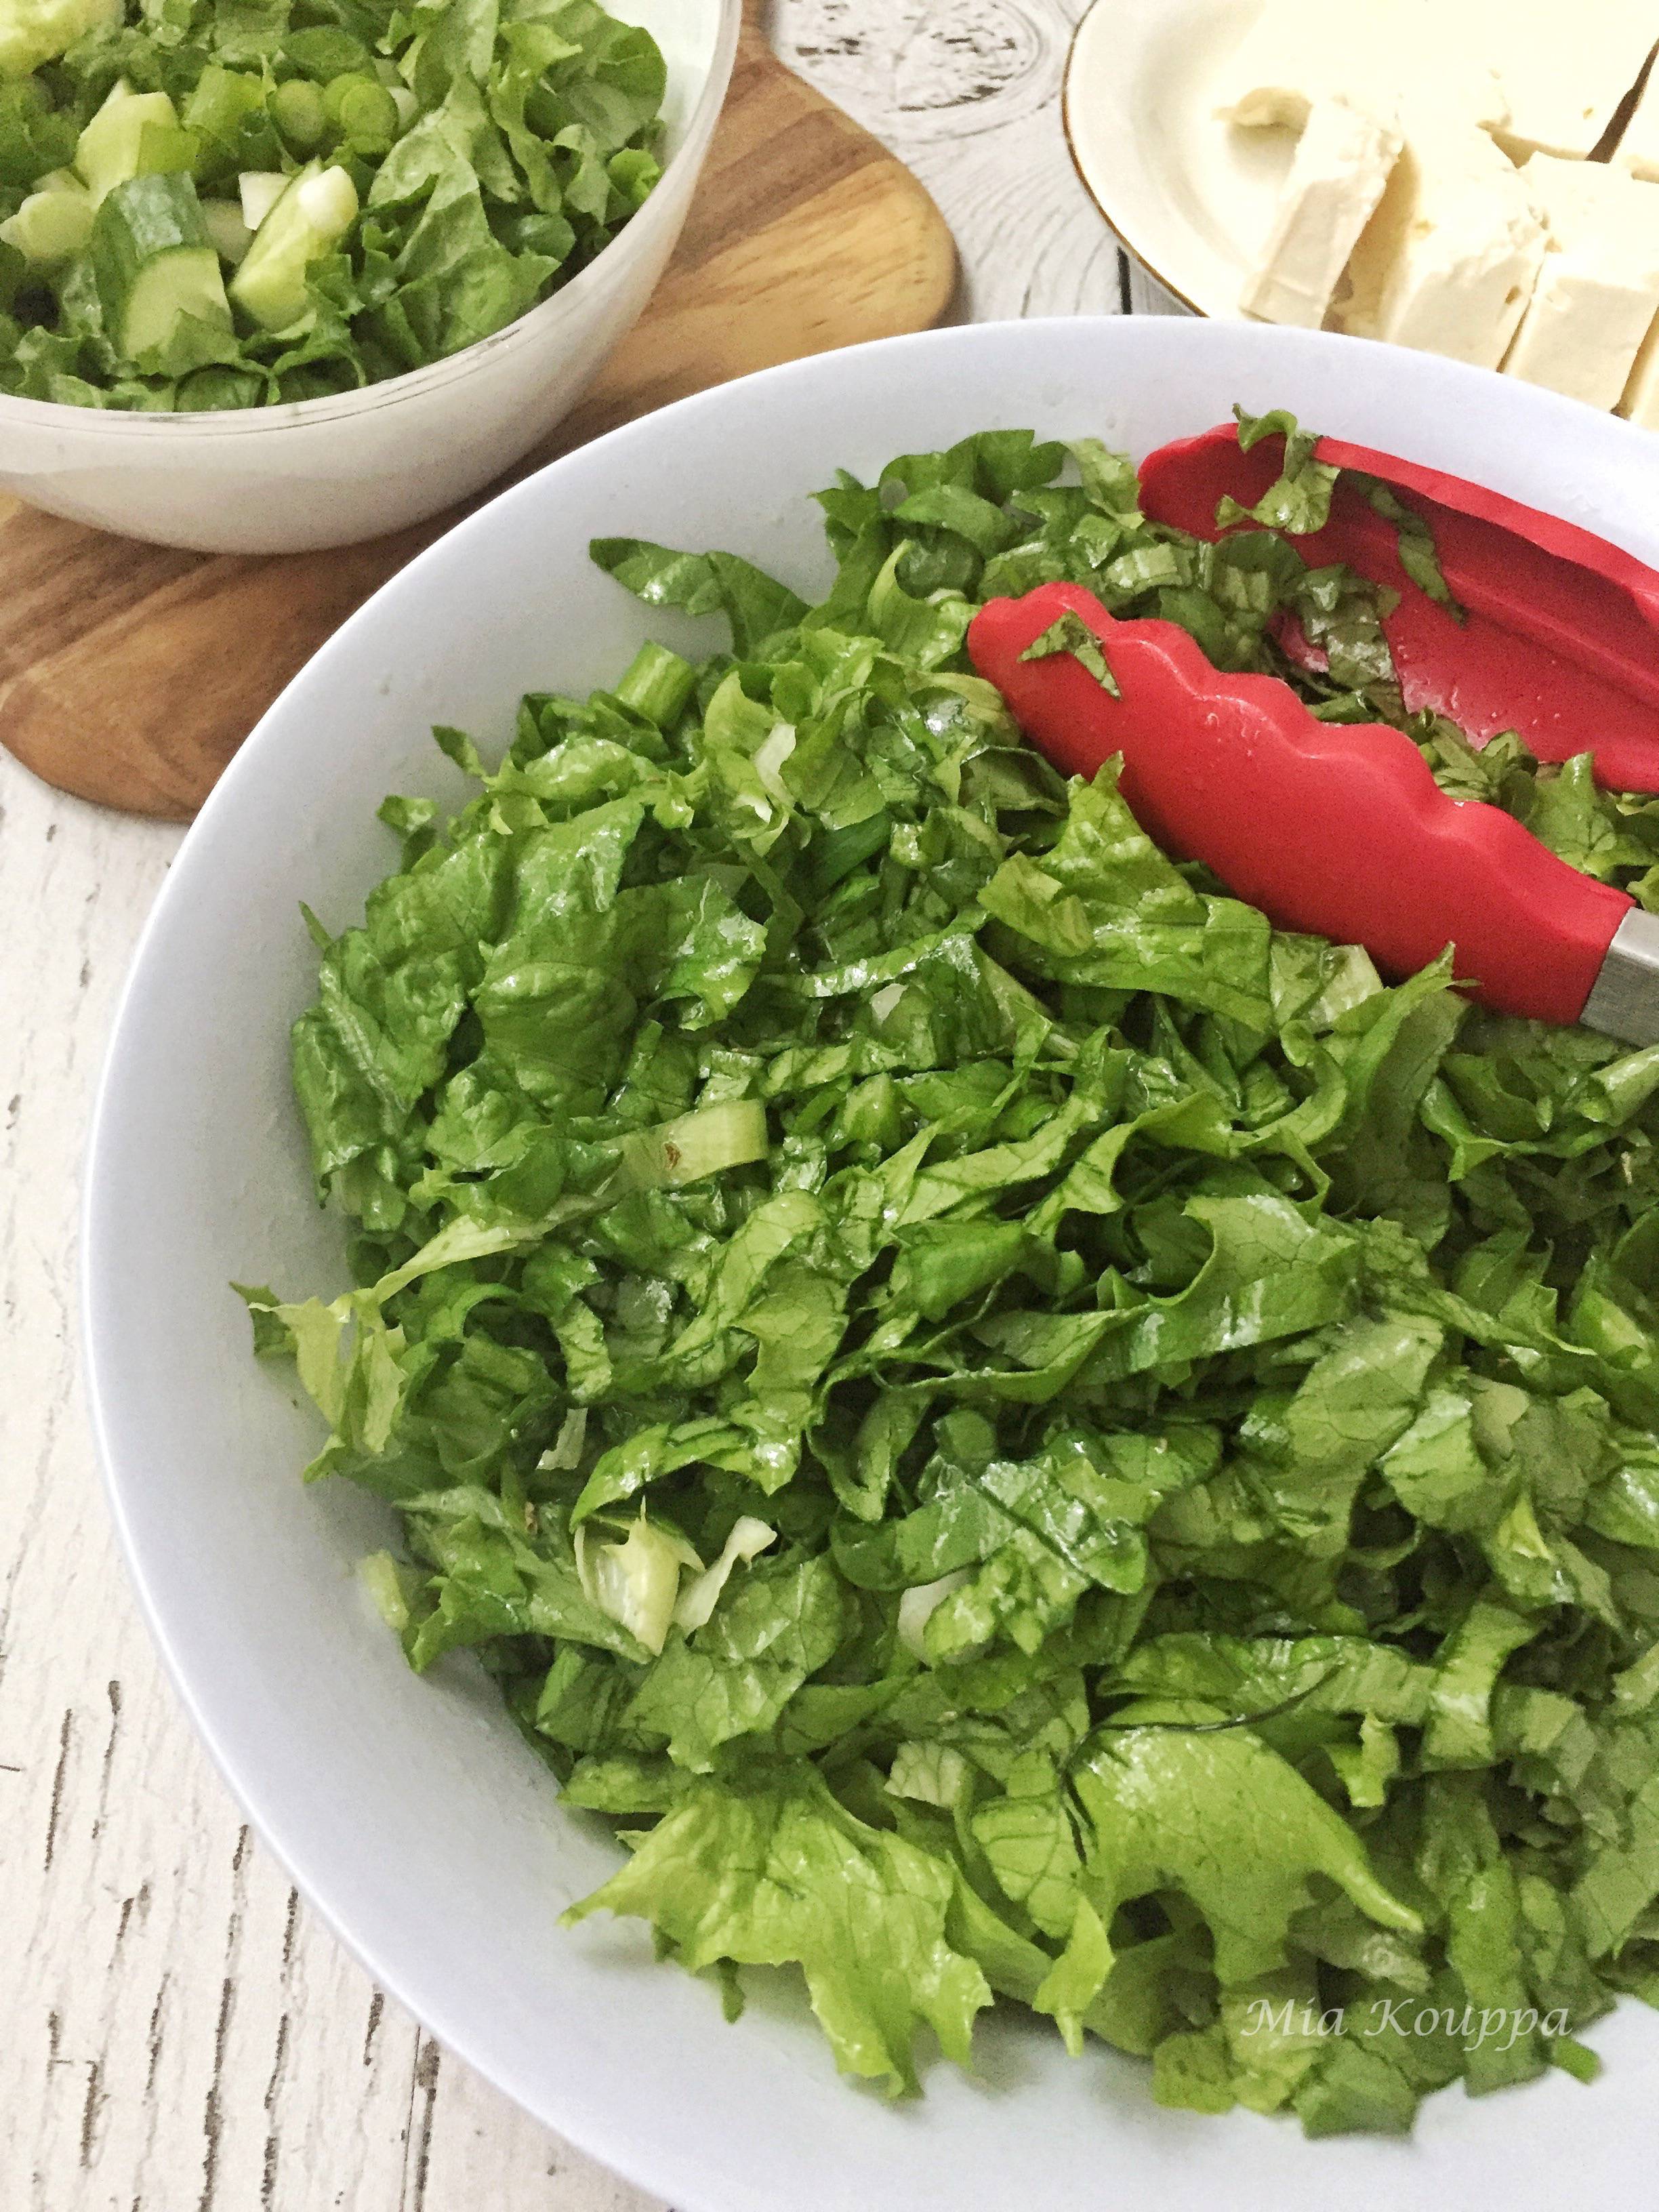 Maroulosalata, a deliciously, simple, easy lettuce salad where the lettuce is the star!